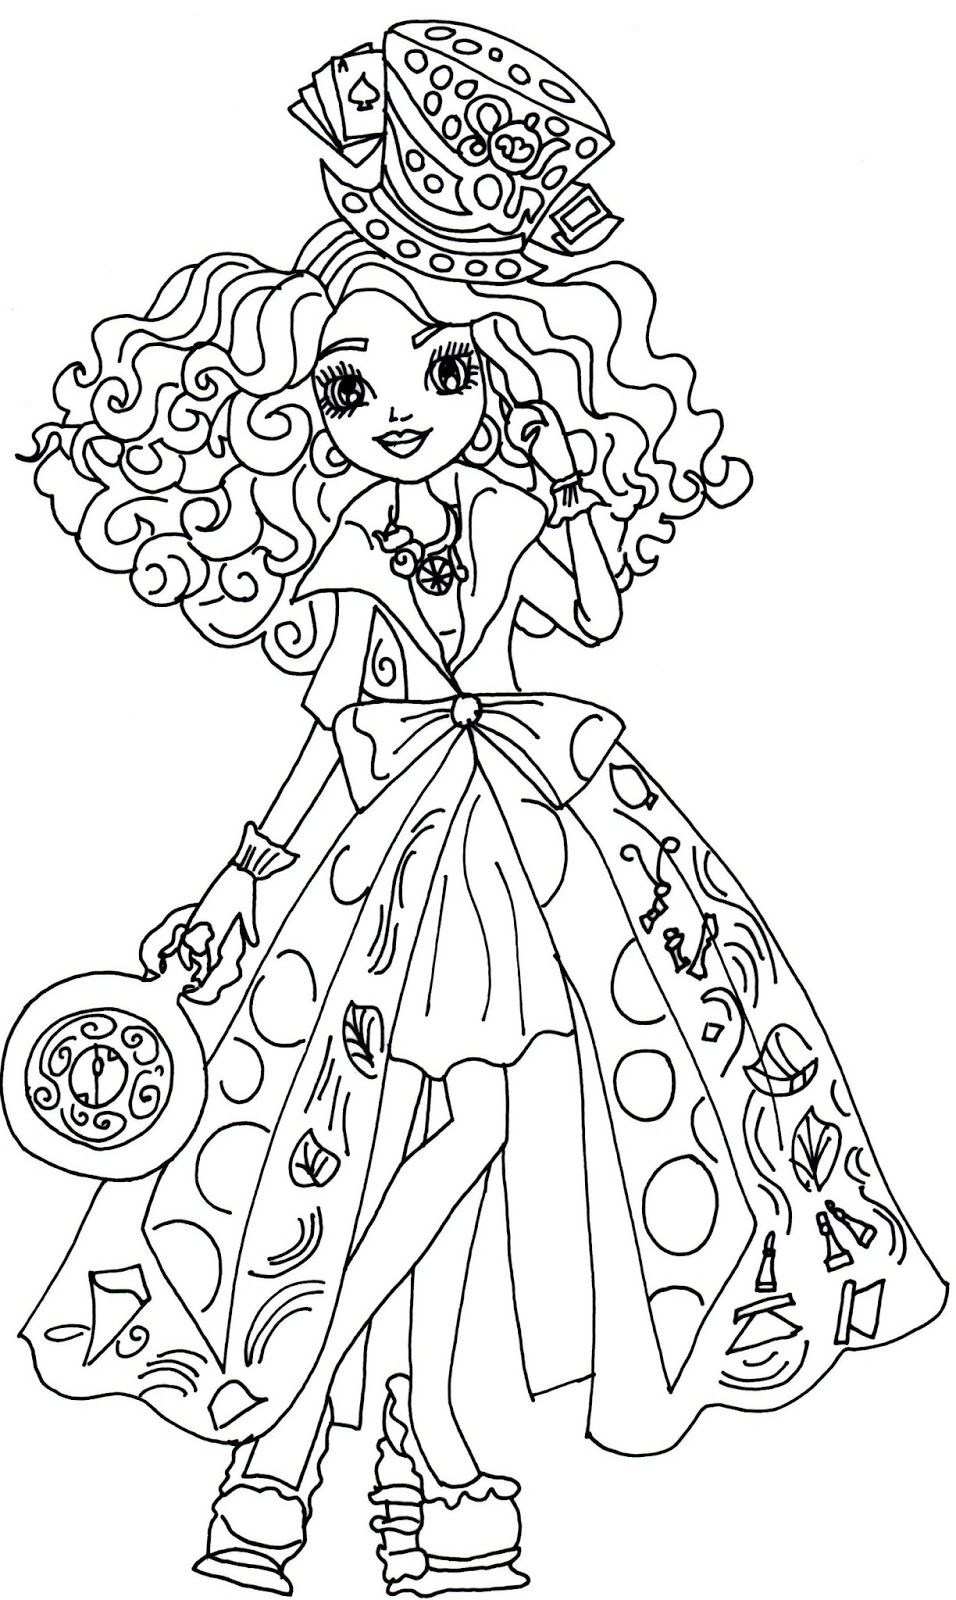 Ever after high coloring page printable cartoon coloring pages coloring pages coloring pages for girls